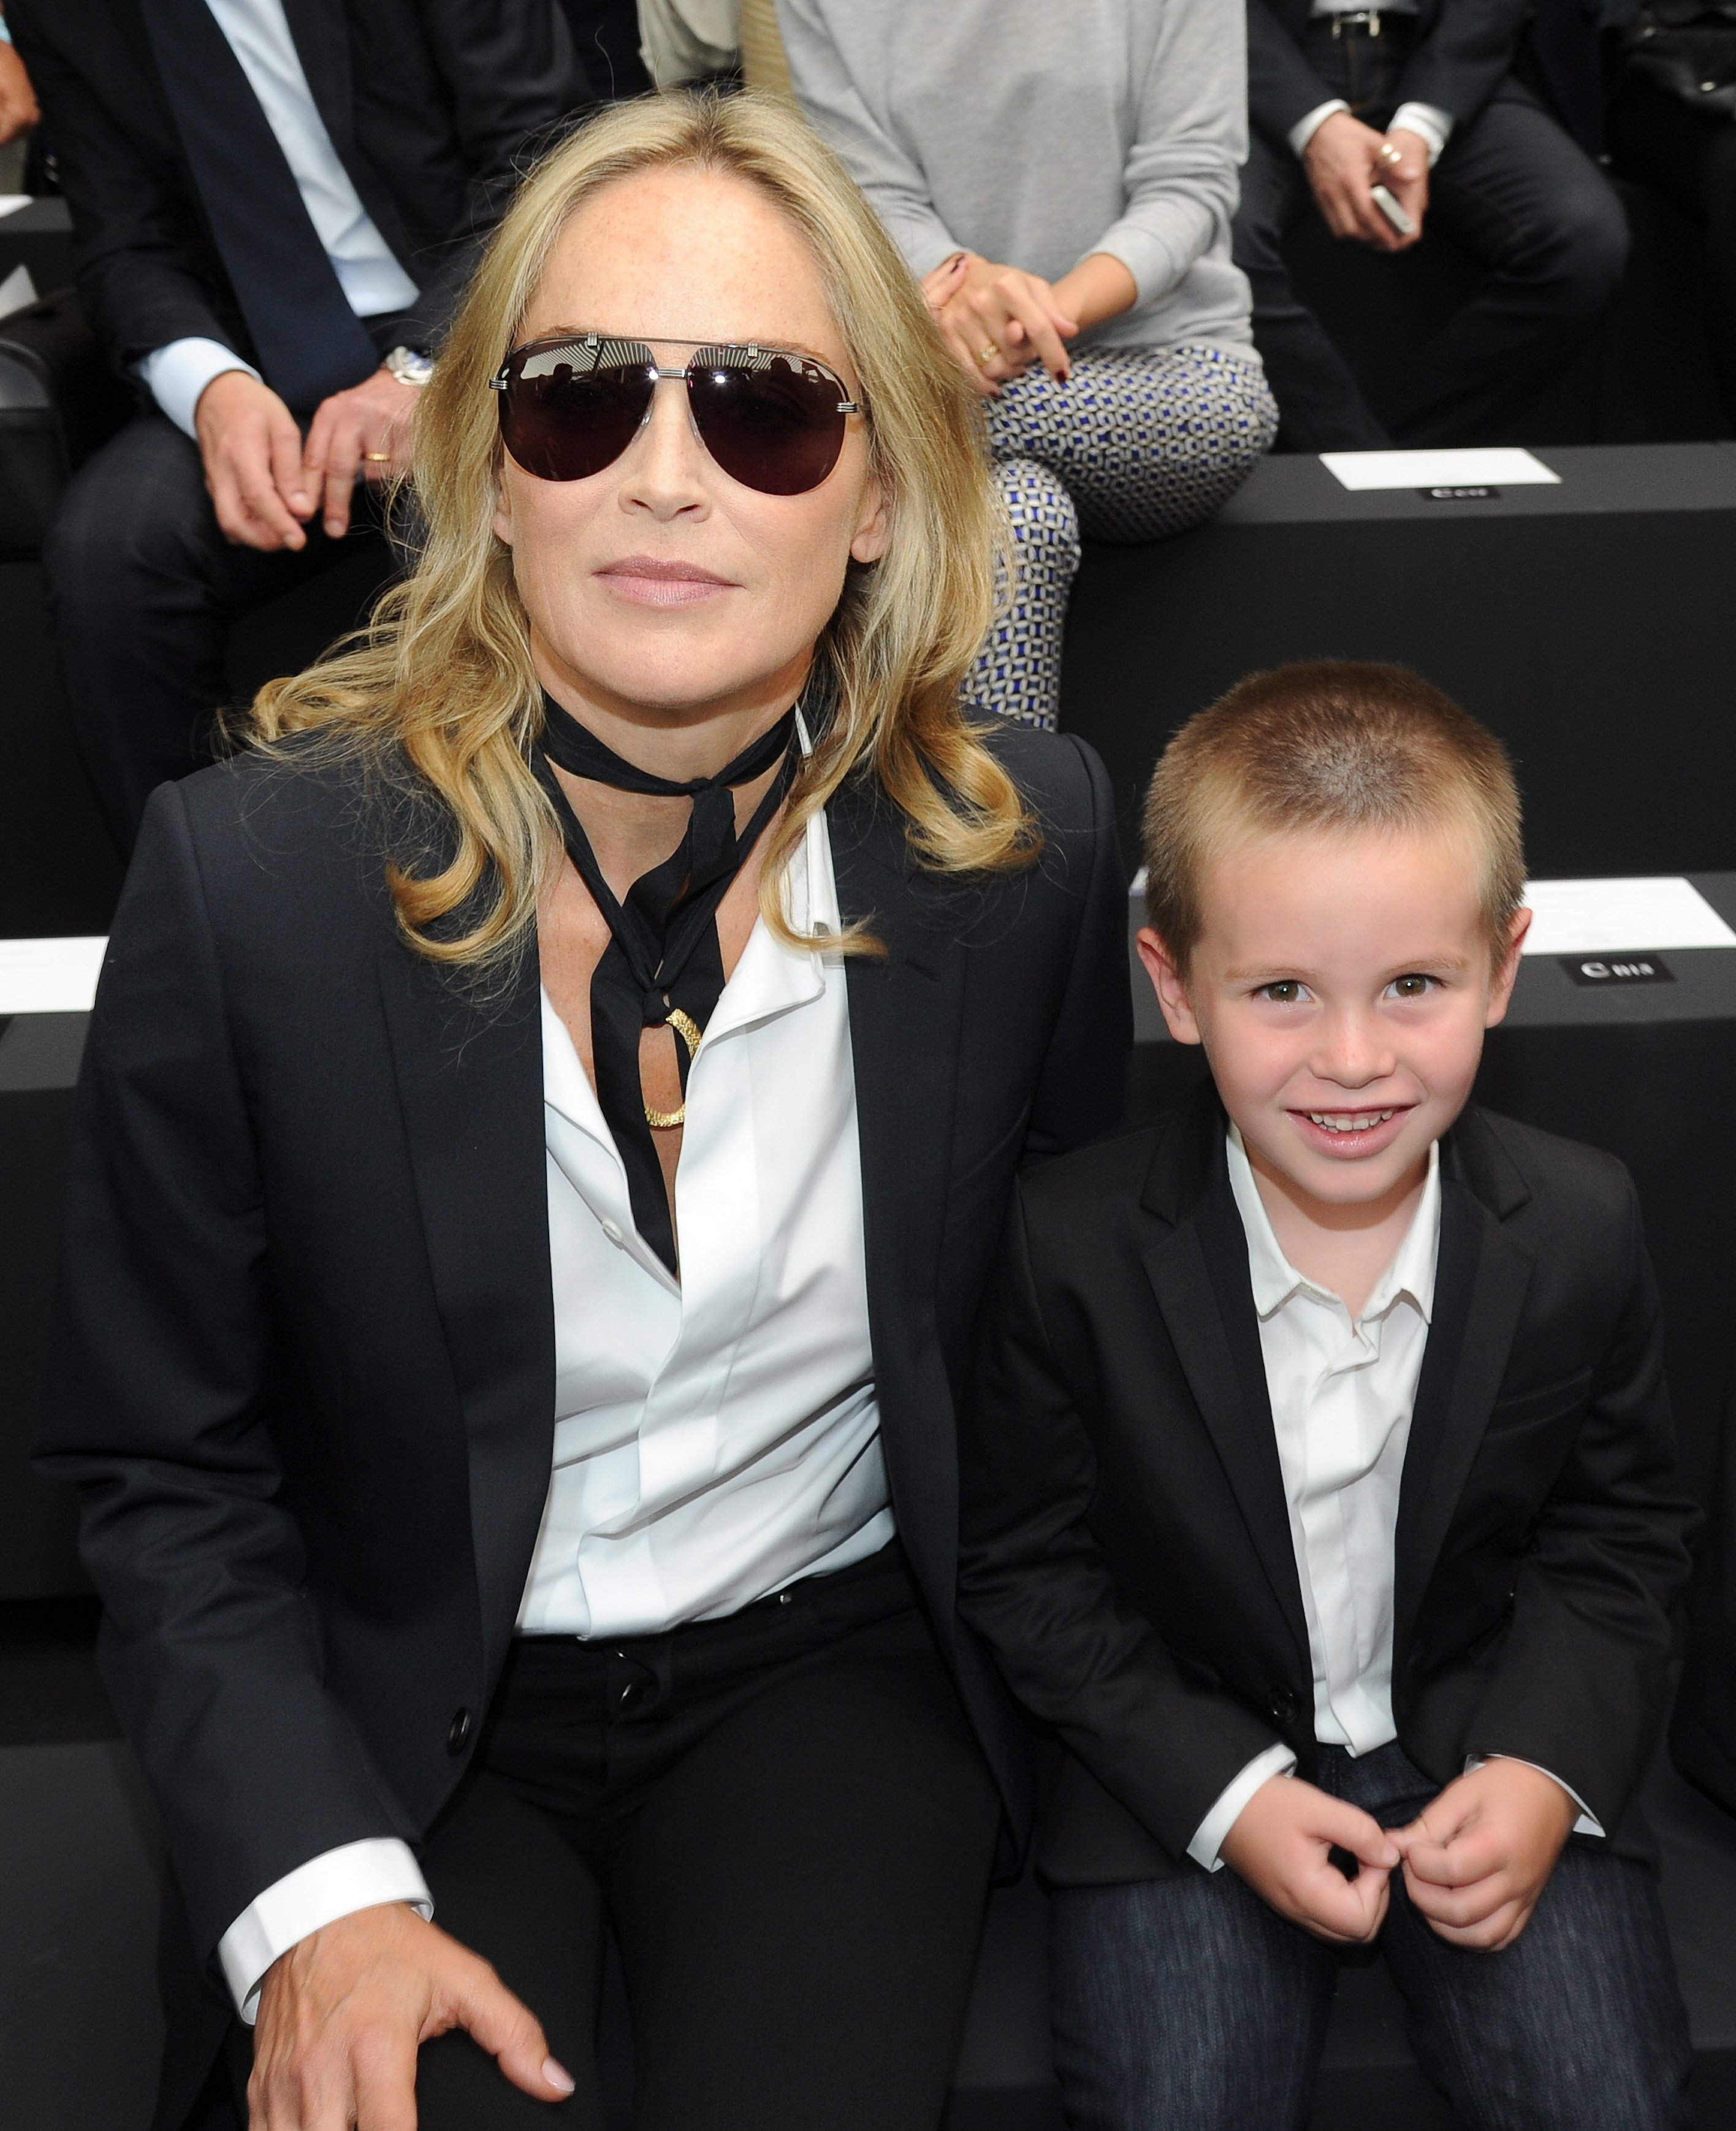 Sharon Stone at the Dior Homme Menswear Spring / Summer 2013 show with her youngest son Quinn | Photo: Getty Images